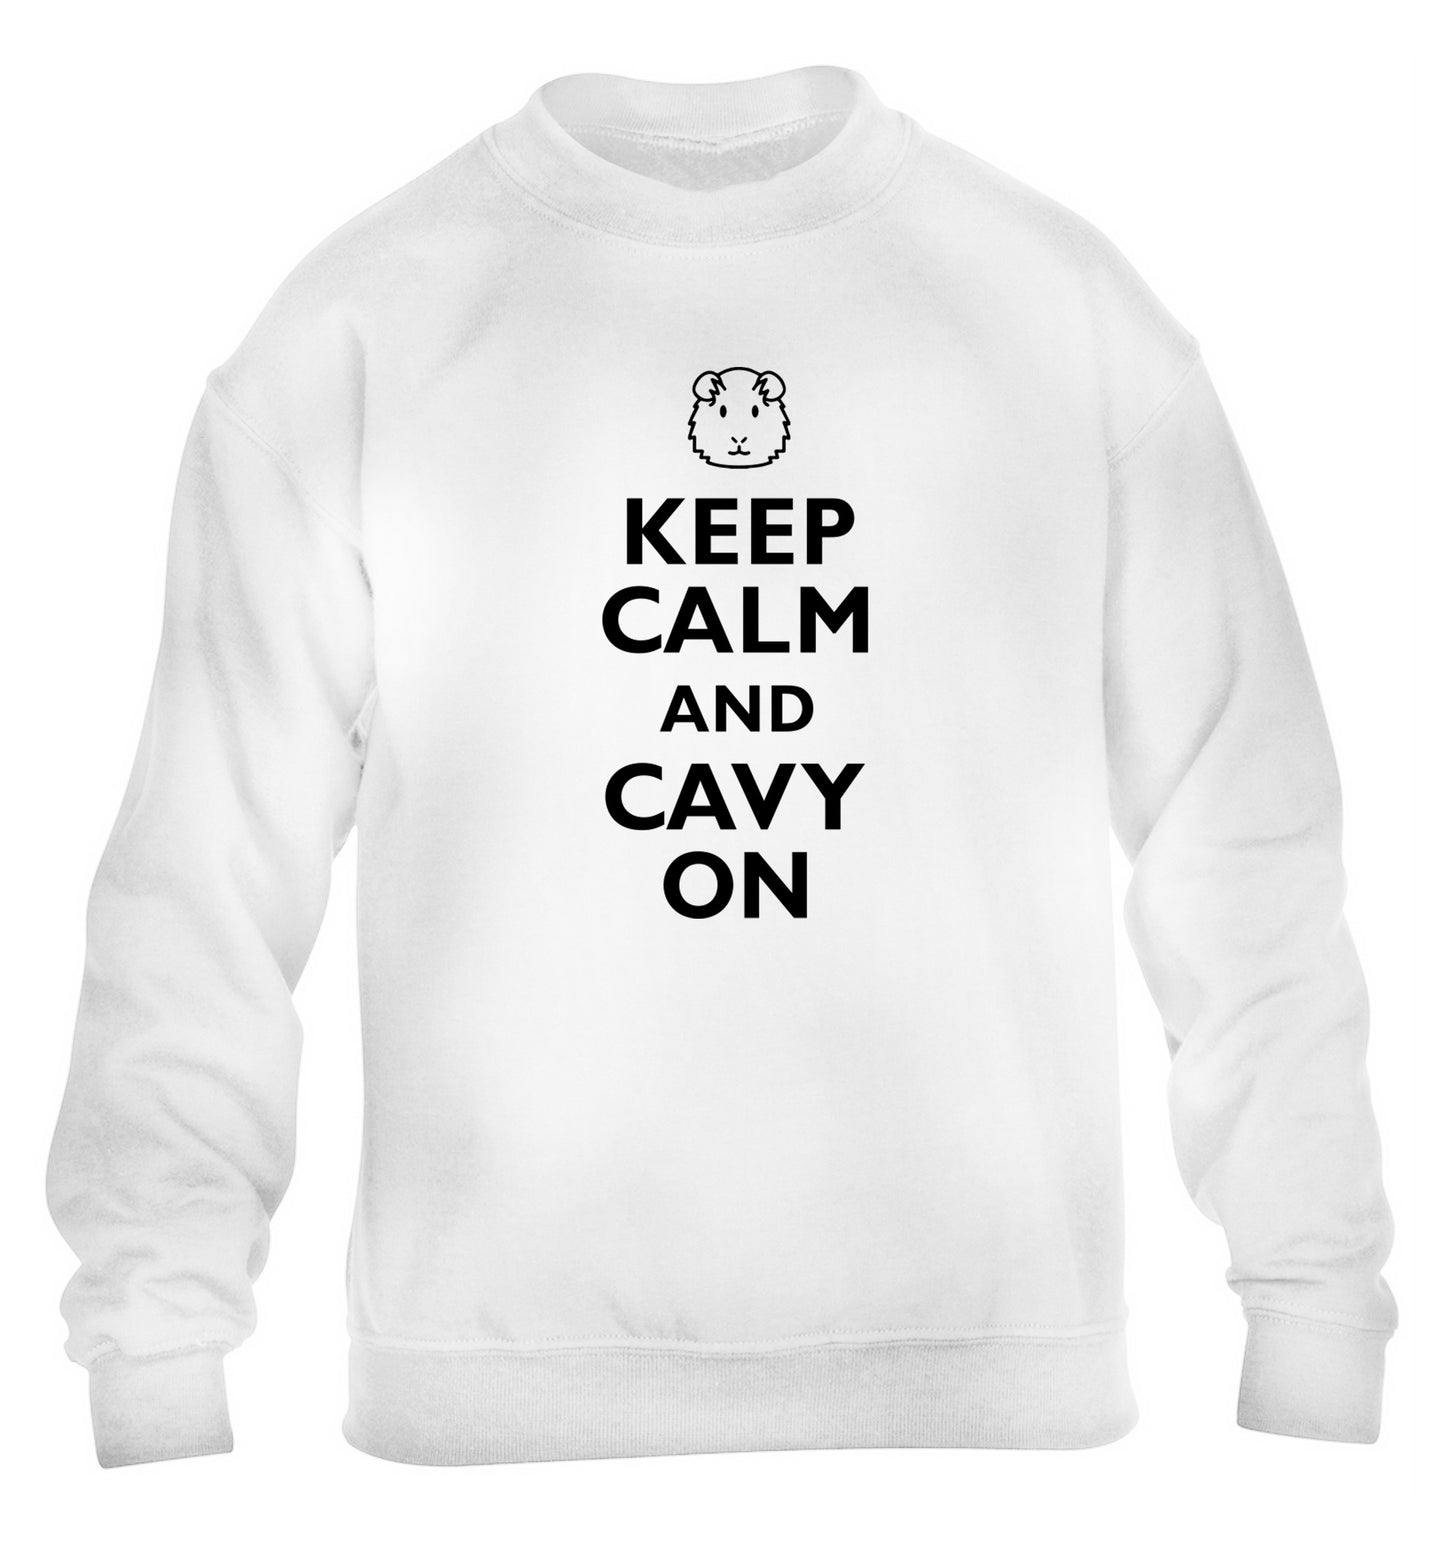 Keep calm and cavvy on children's white  sweater 12-14 Years